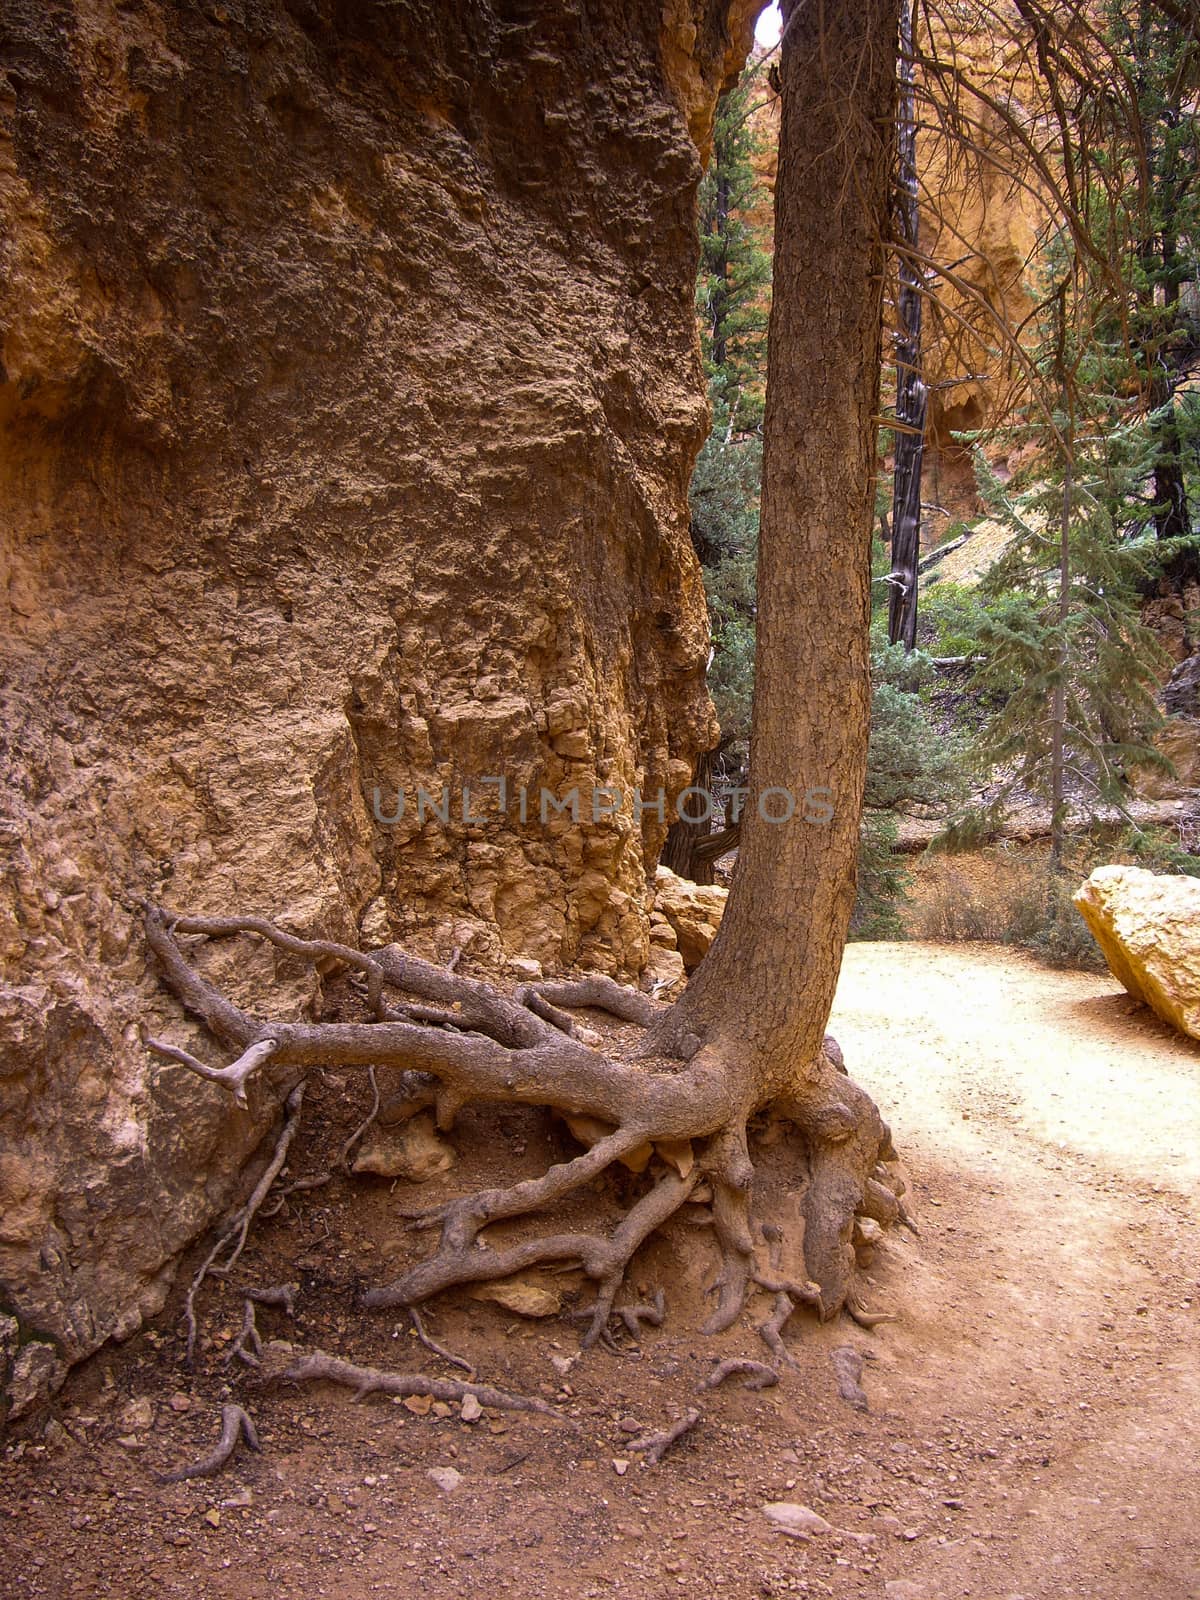 Tree with exposed roots on desert trail by emattil